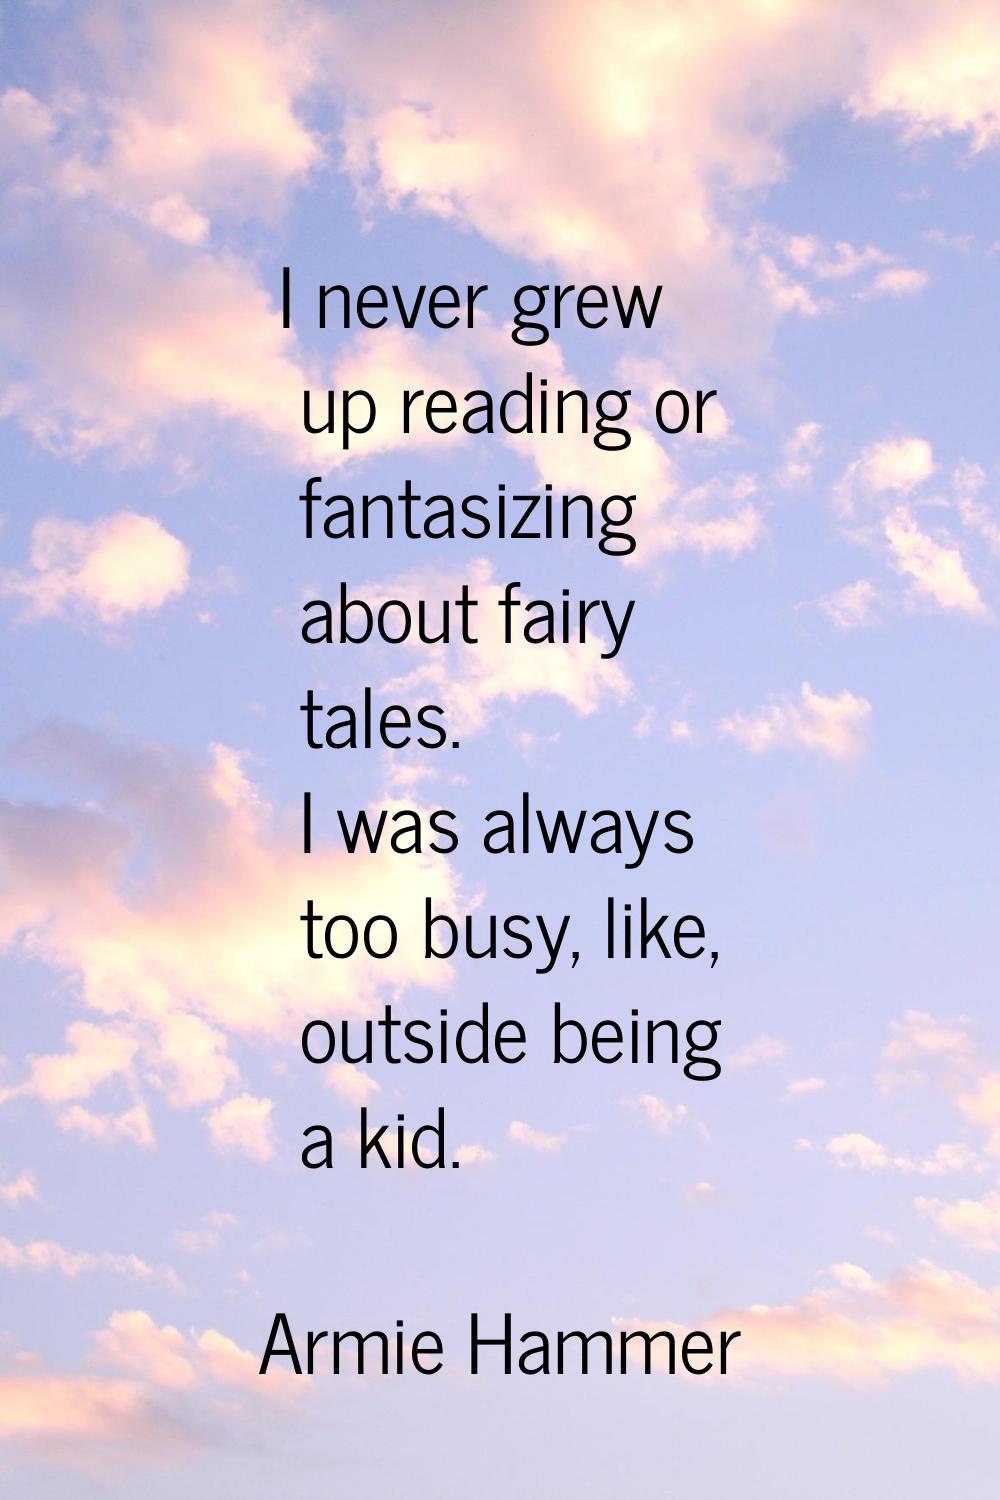 I never grew up reading or fantasizing about fairy tales. I was always too busy, like, outside bein